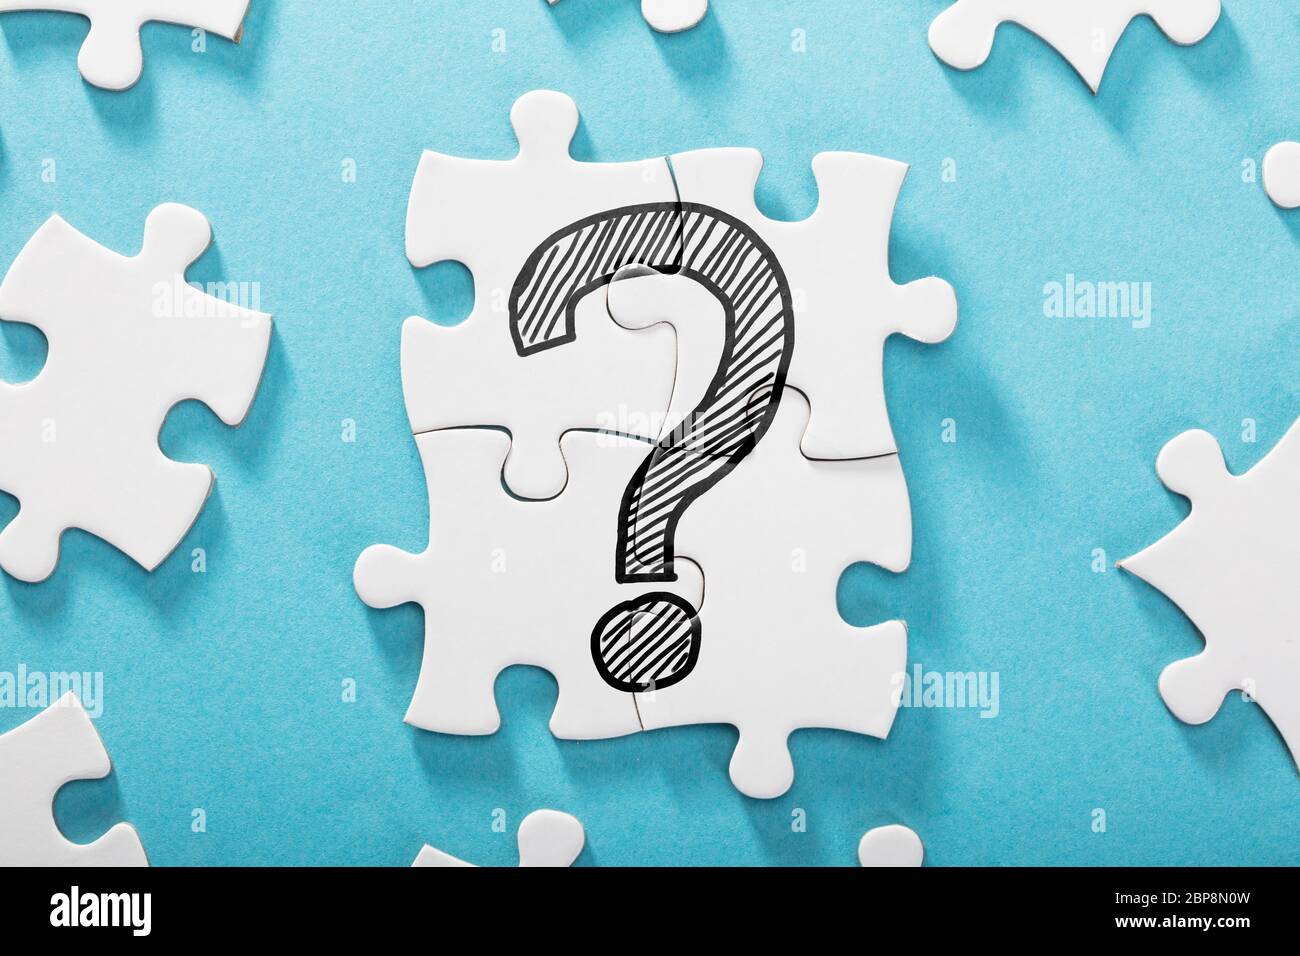 Elevated View Of Question Mark Icon On White Puzzle Over The Blue Background Stock Photo